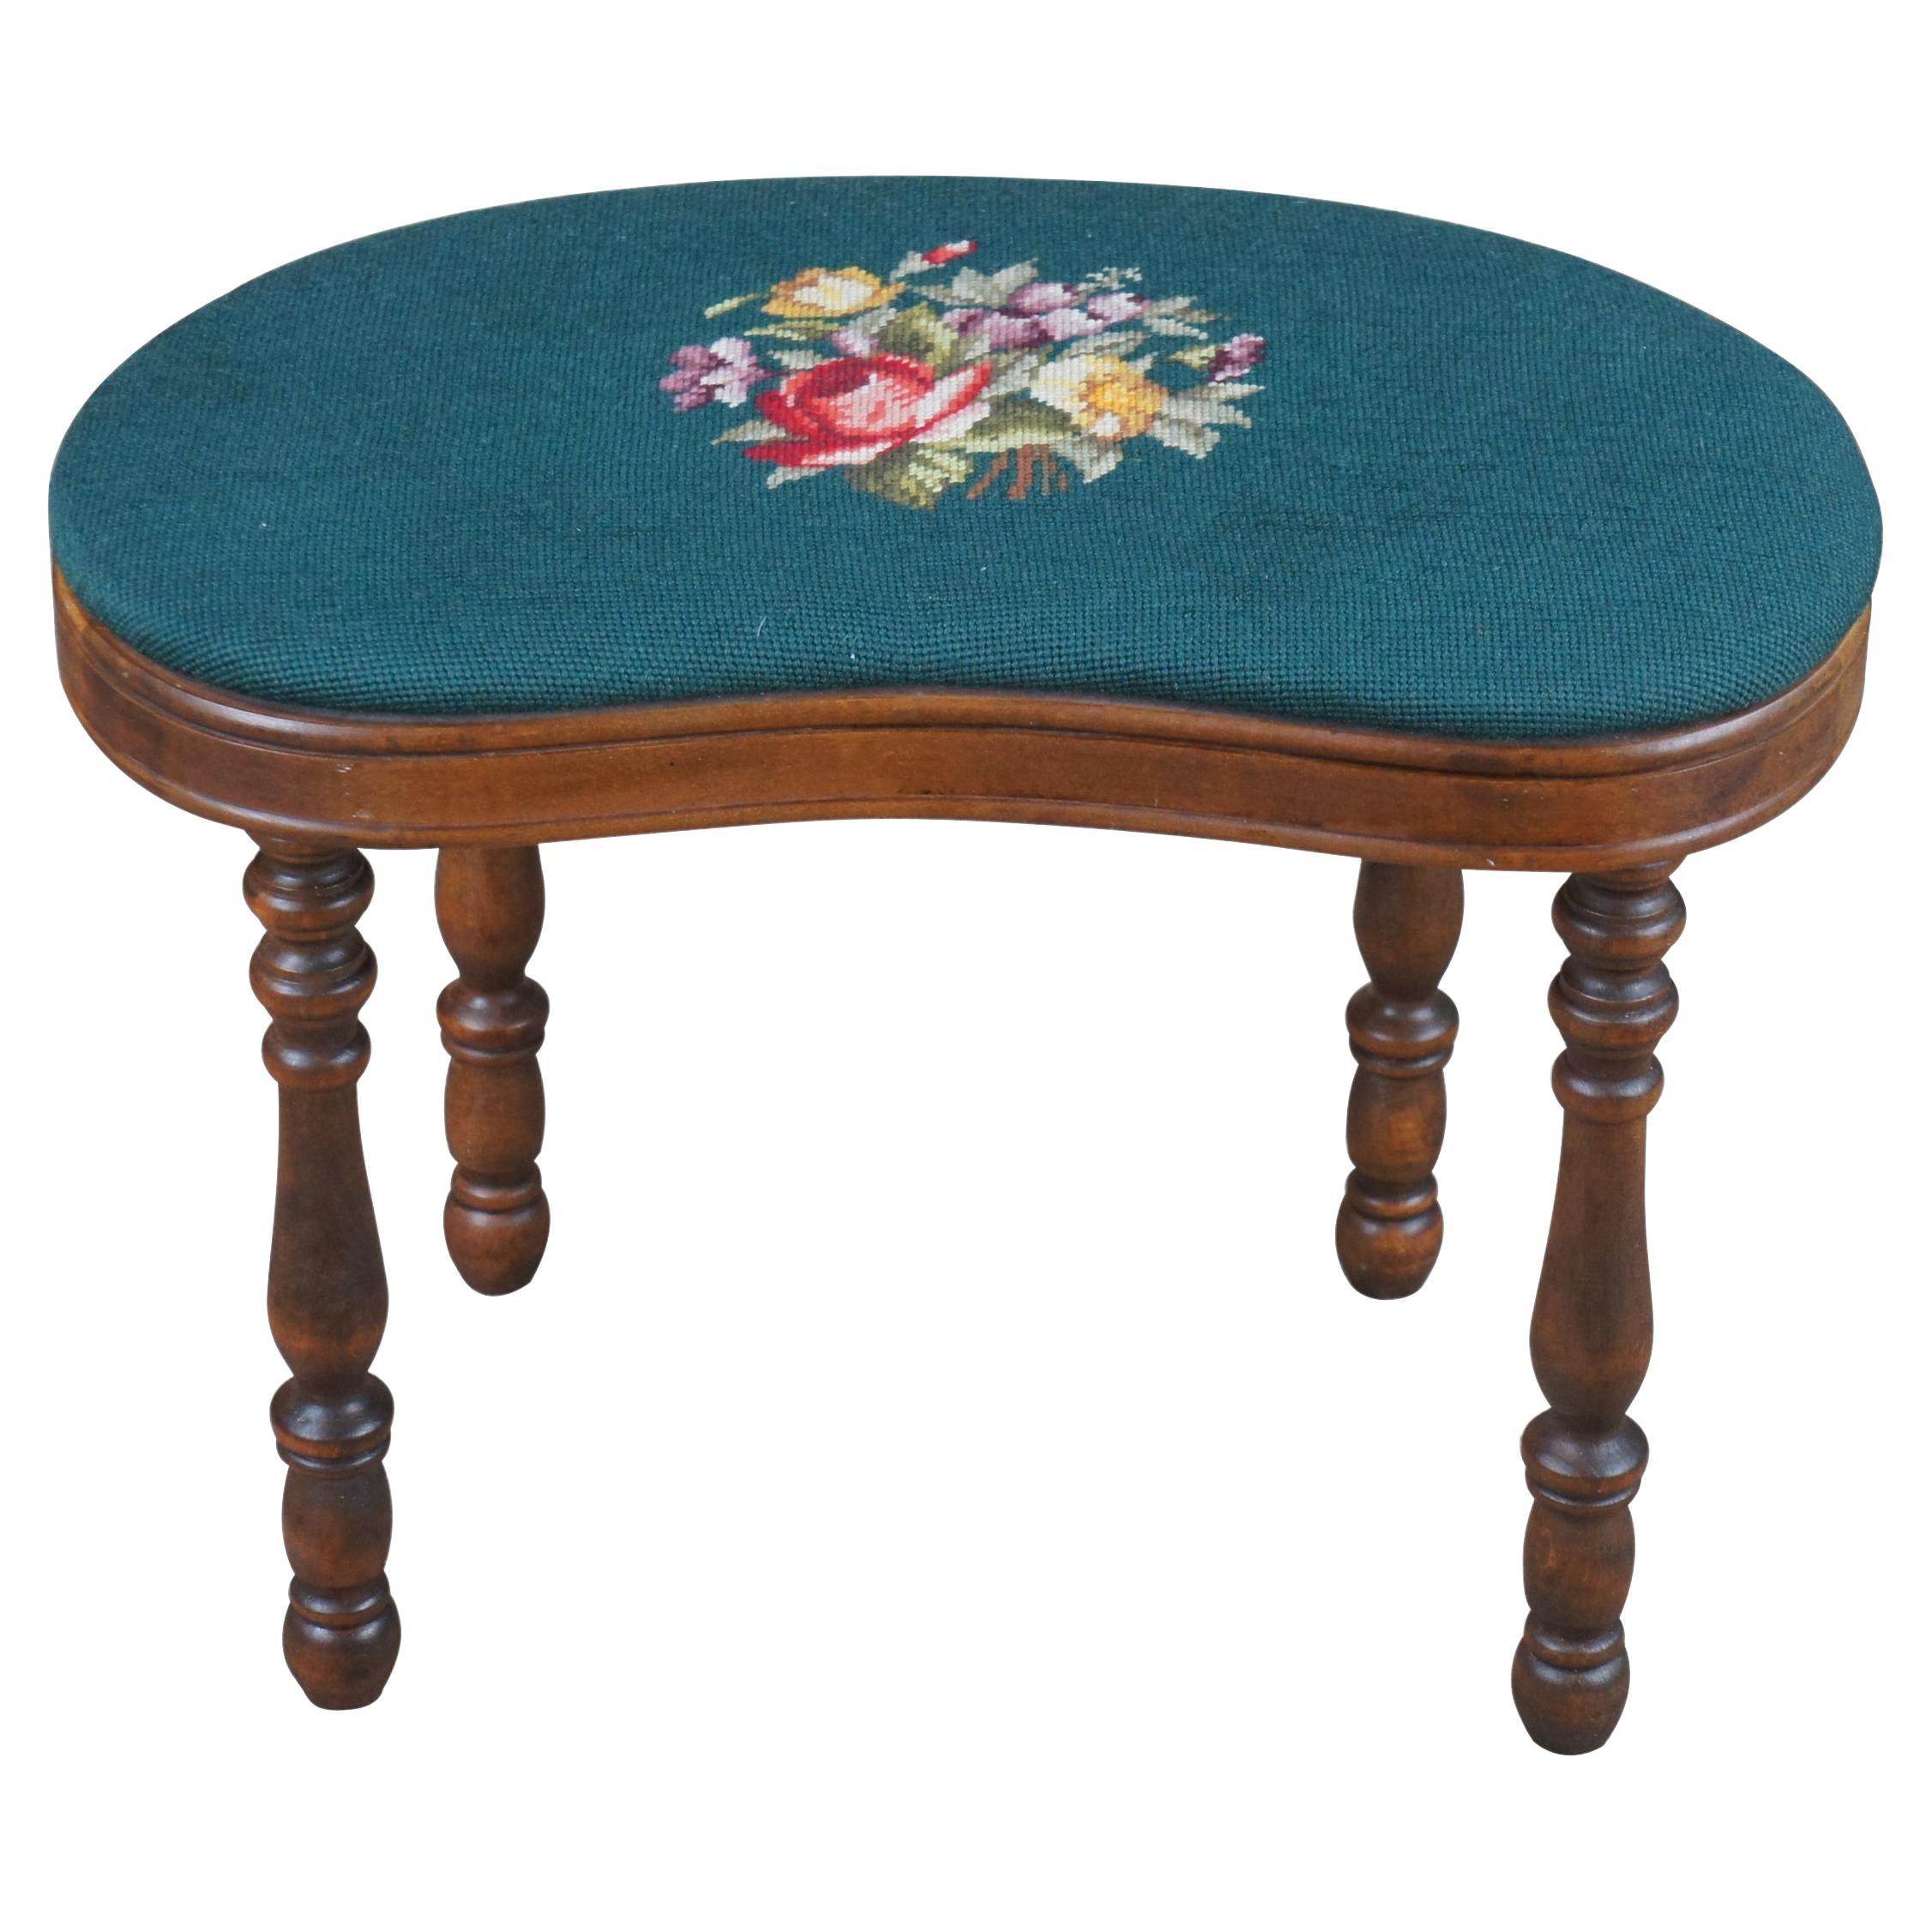 Mid Century Kidney Bean Green Floral Embroidered Foot Stool Piano Bench Ottoman im Angebot